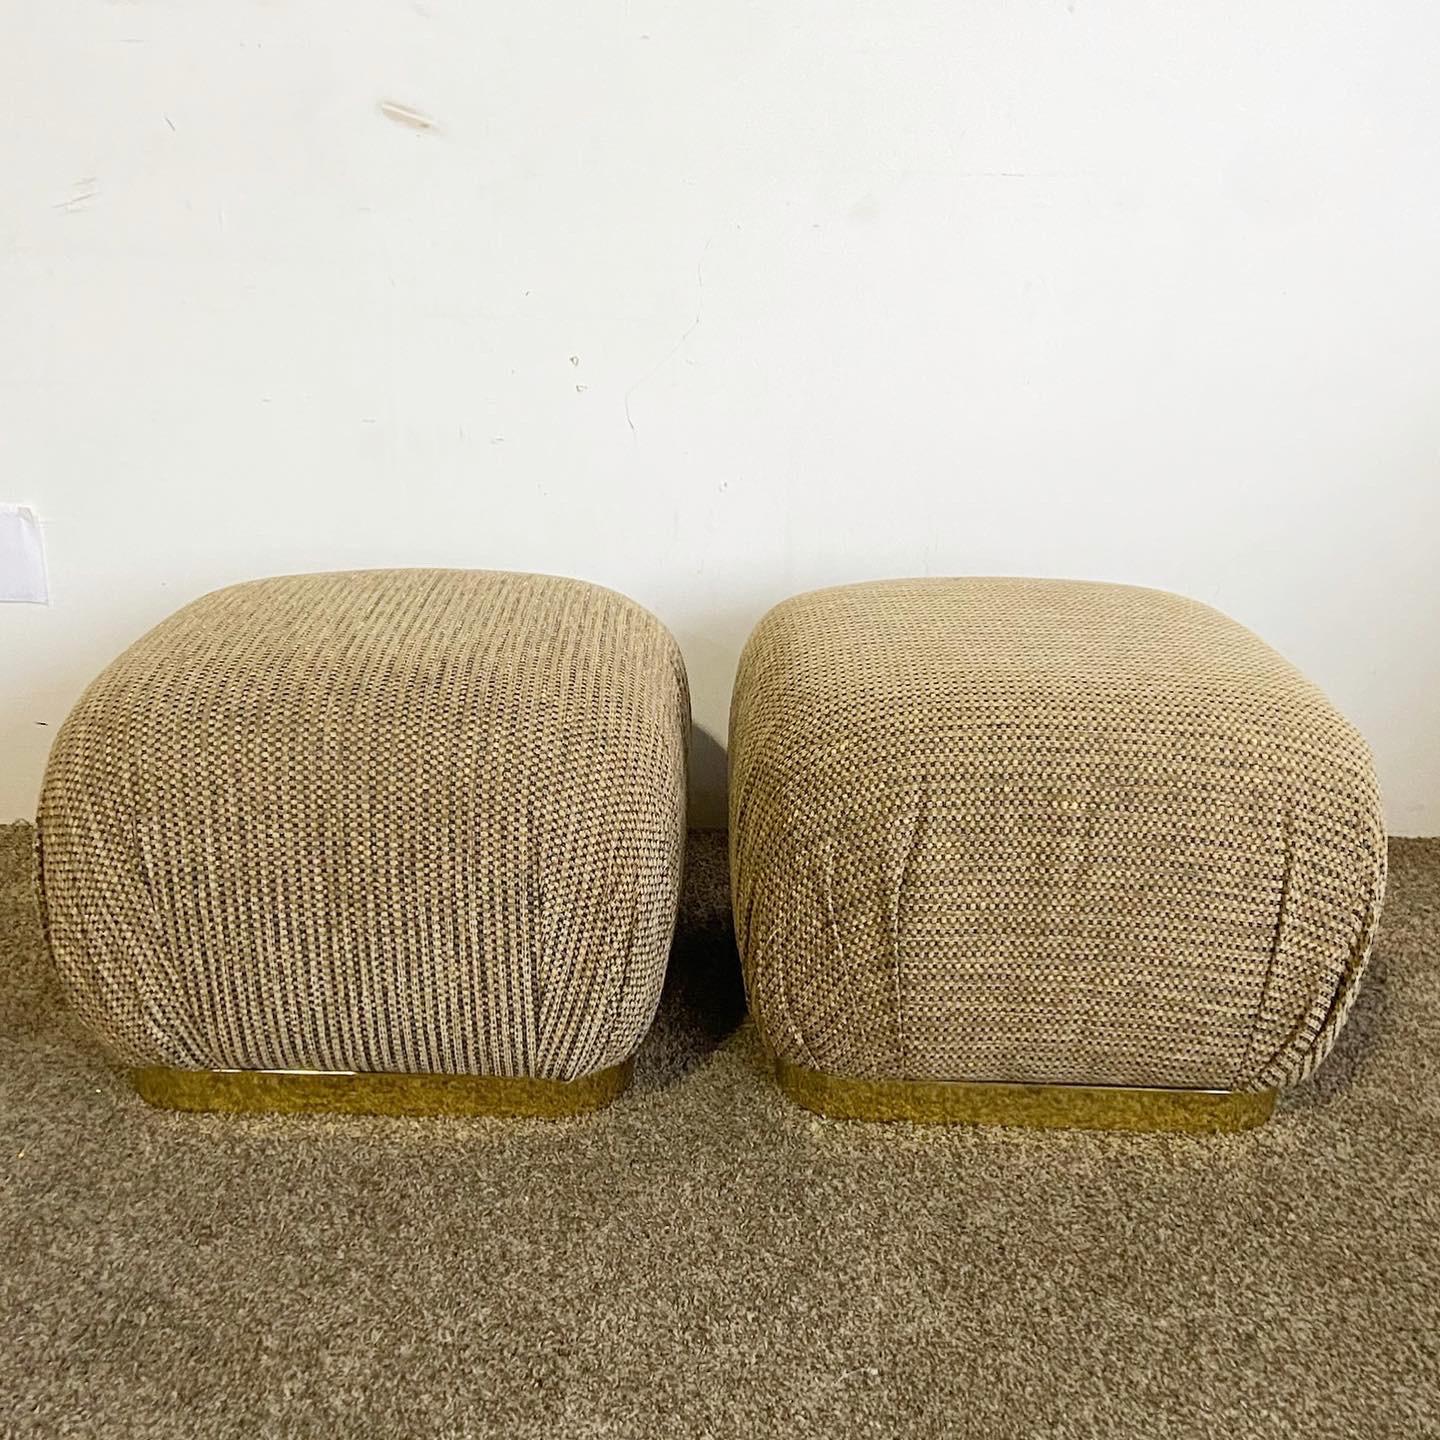 Late 20th Century Postmodern Textured Brown Fabric Pouf Ottomans on Gold Base - a Pair For Sale